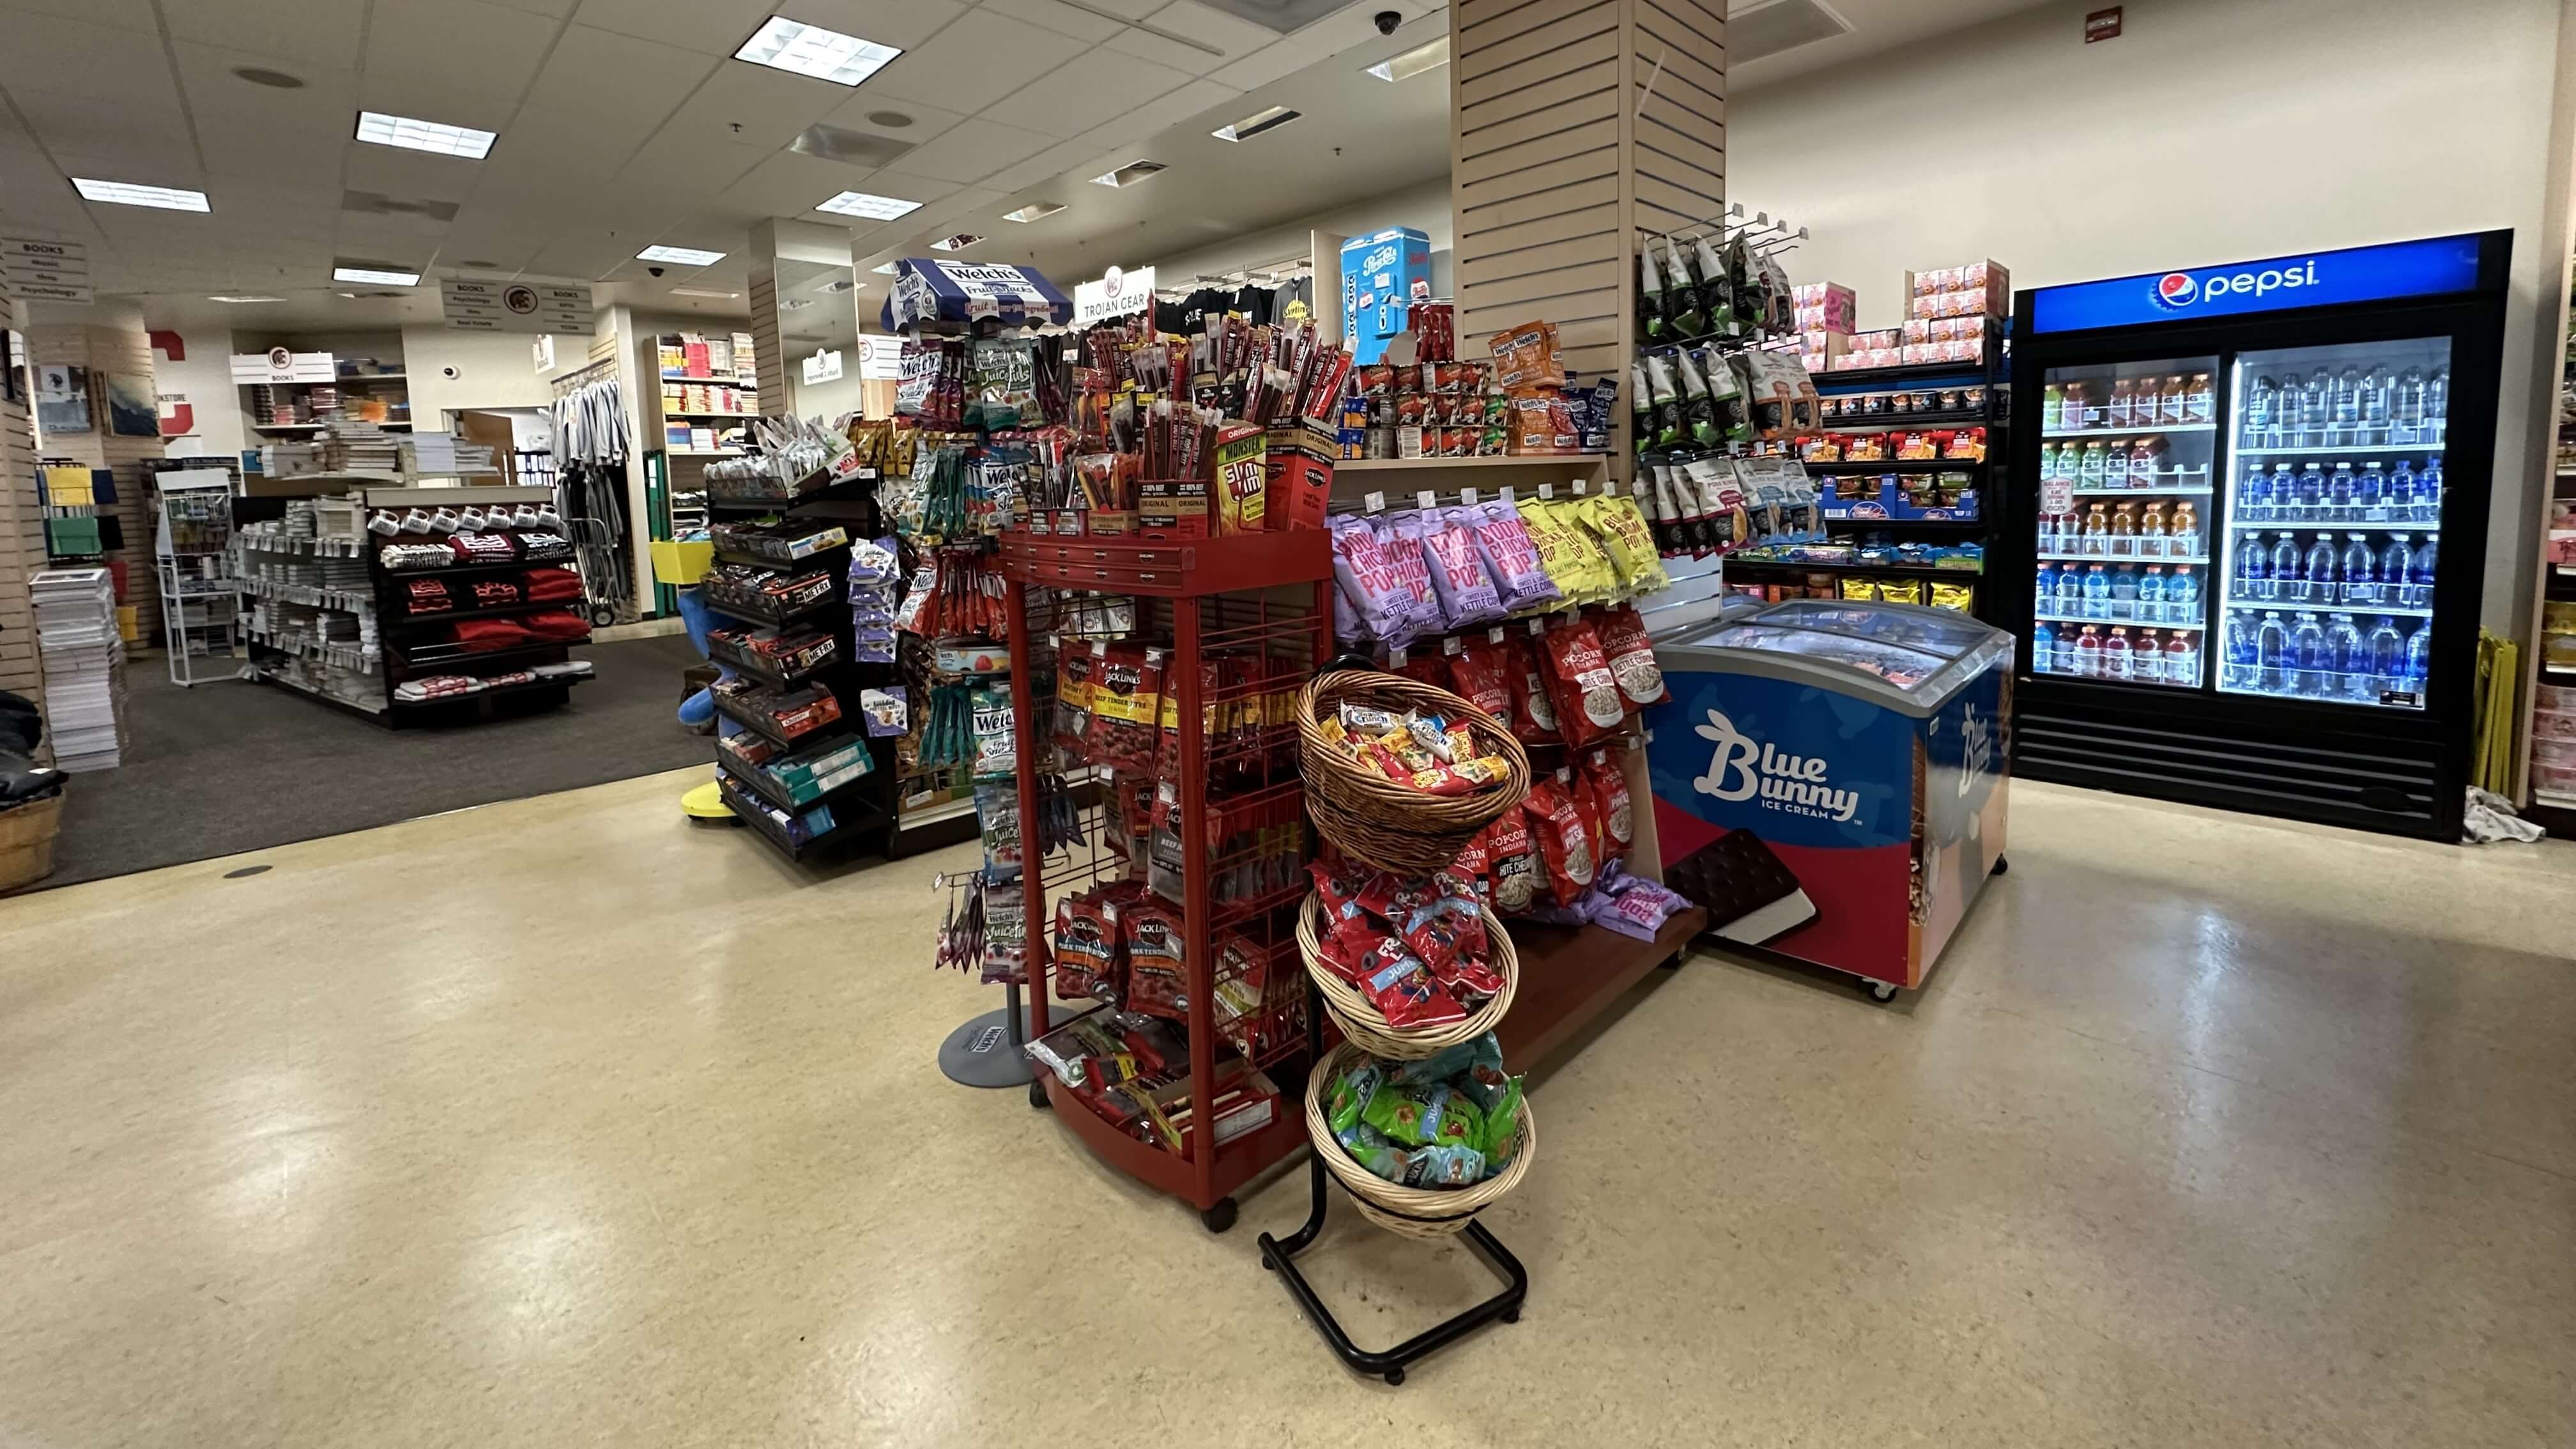 snacks and drinks are displayed in the student bookstore